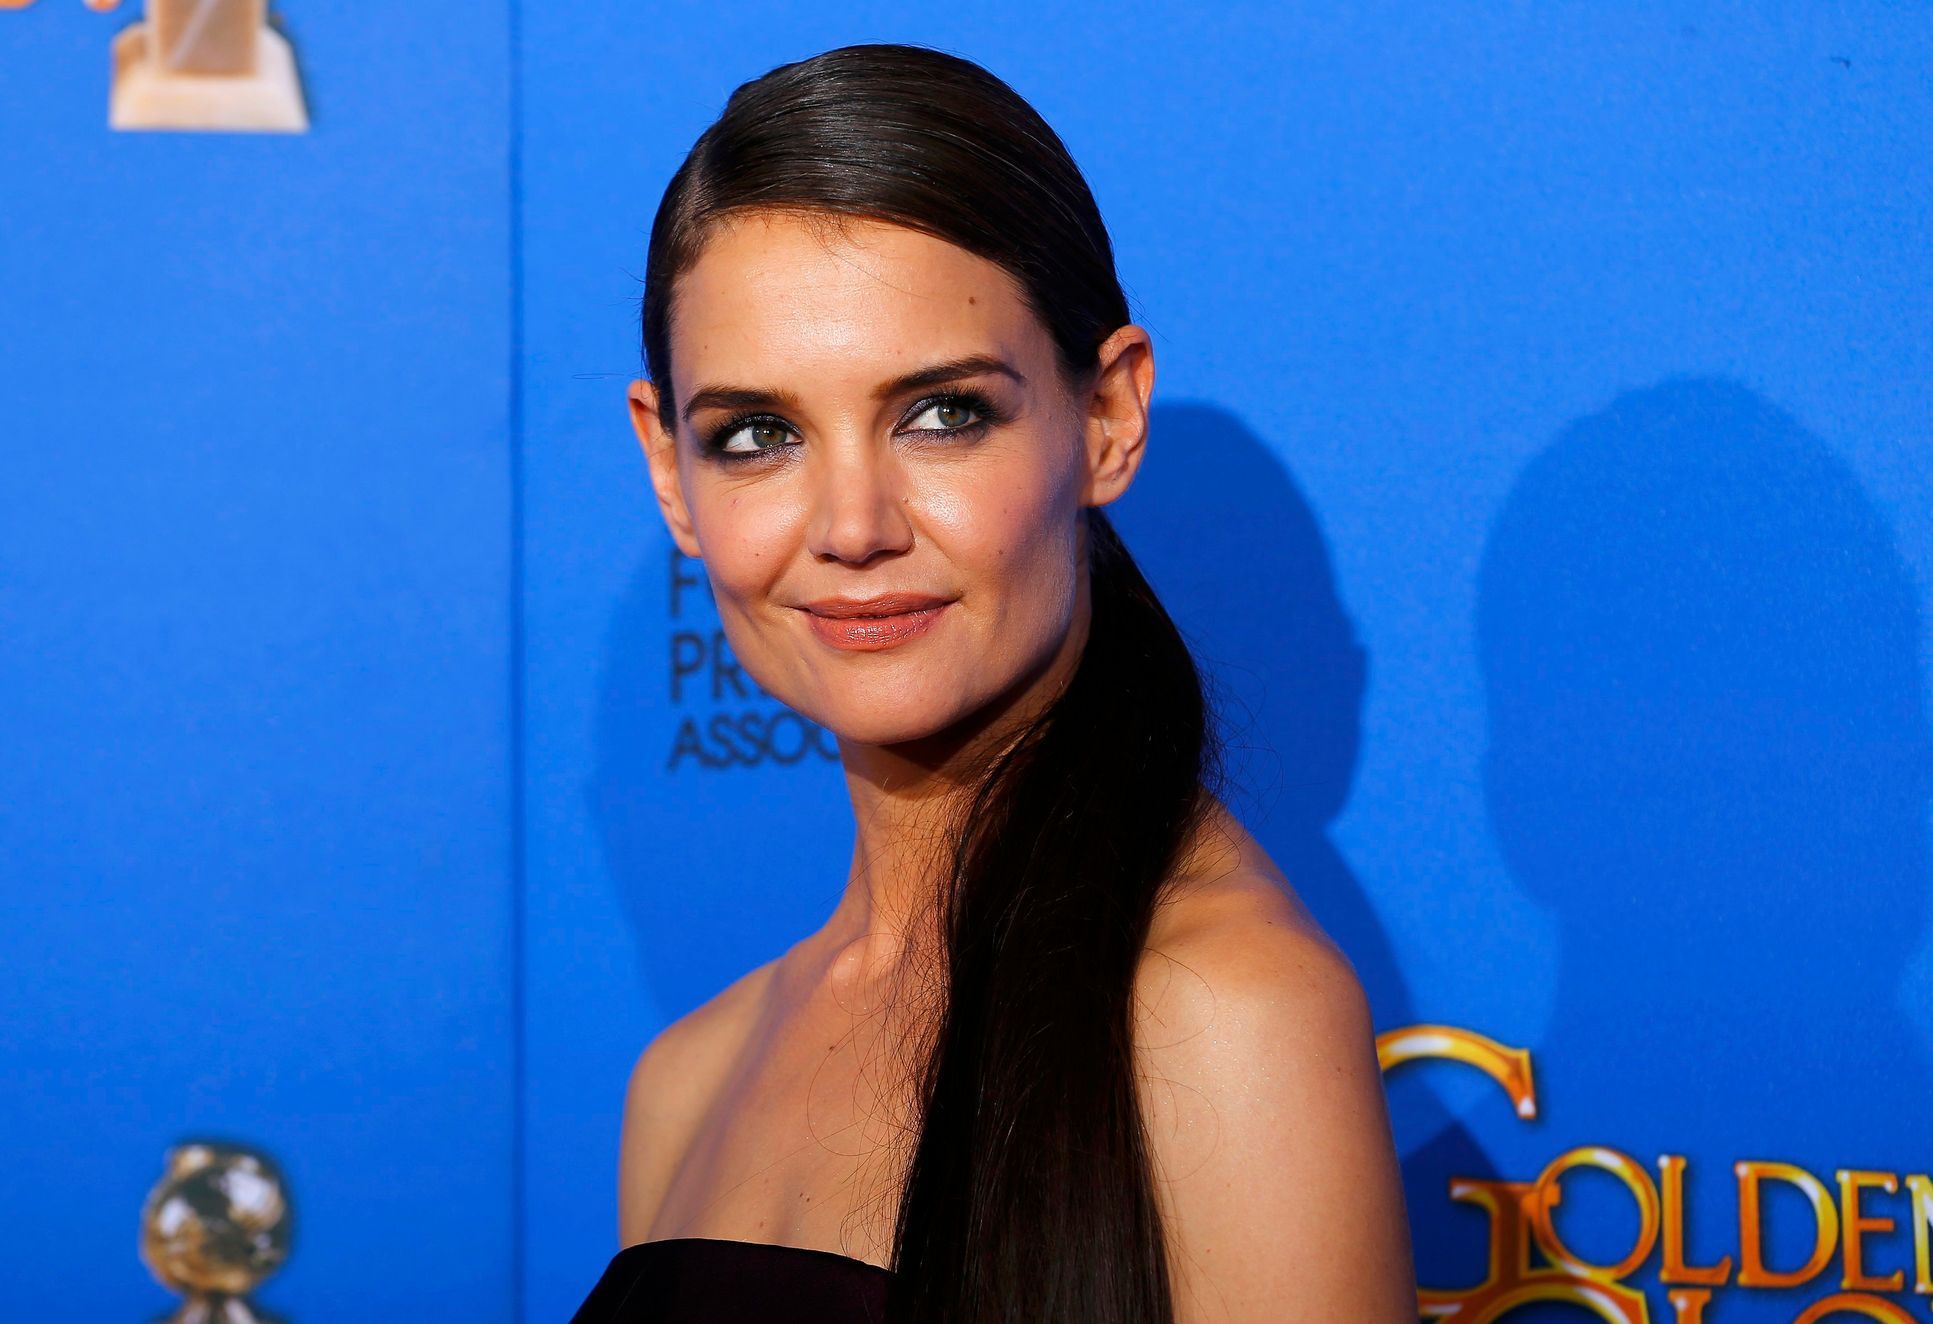 Katie Holmes poses backstage during the 72nd Golden Globe Awards in Beverly Hills